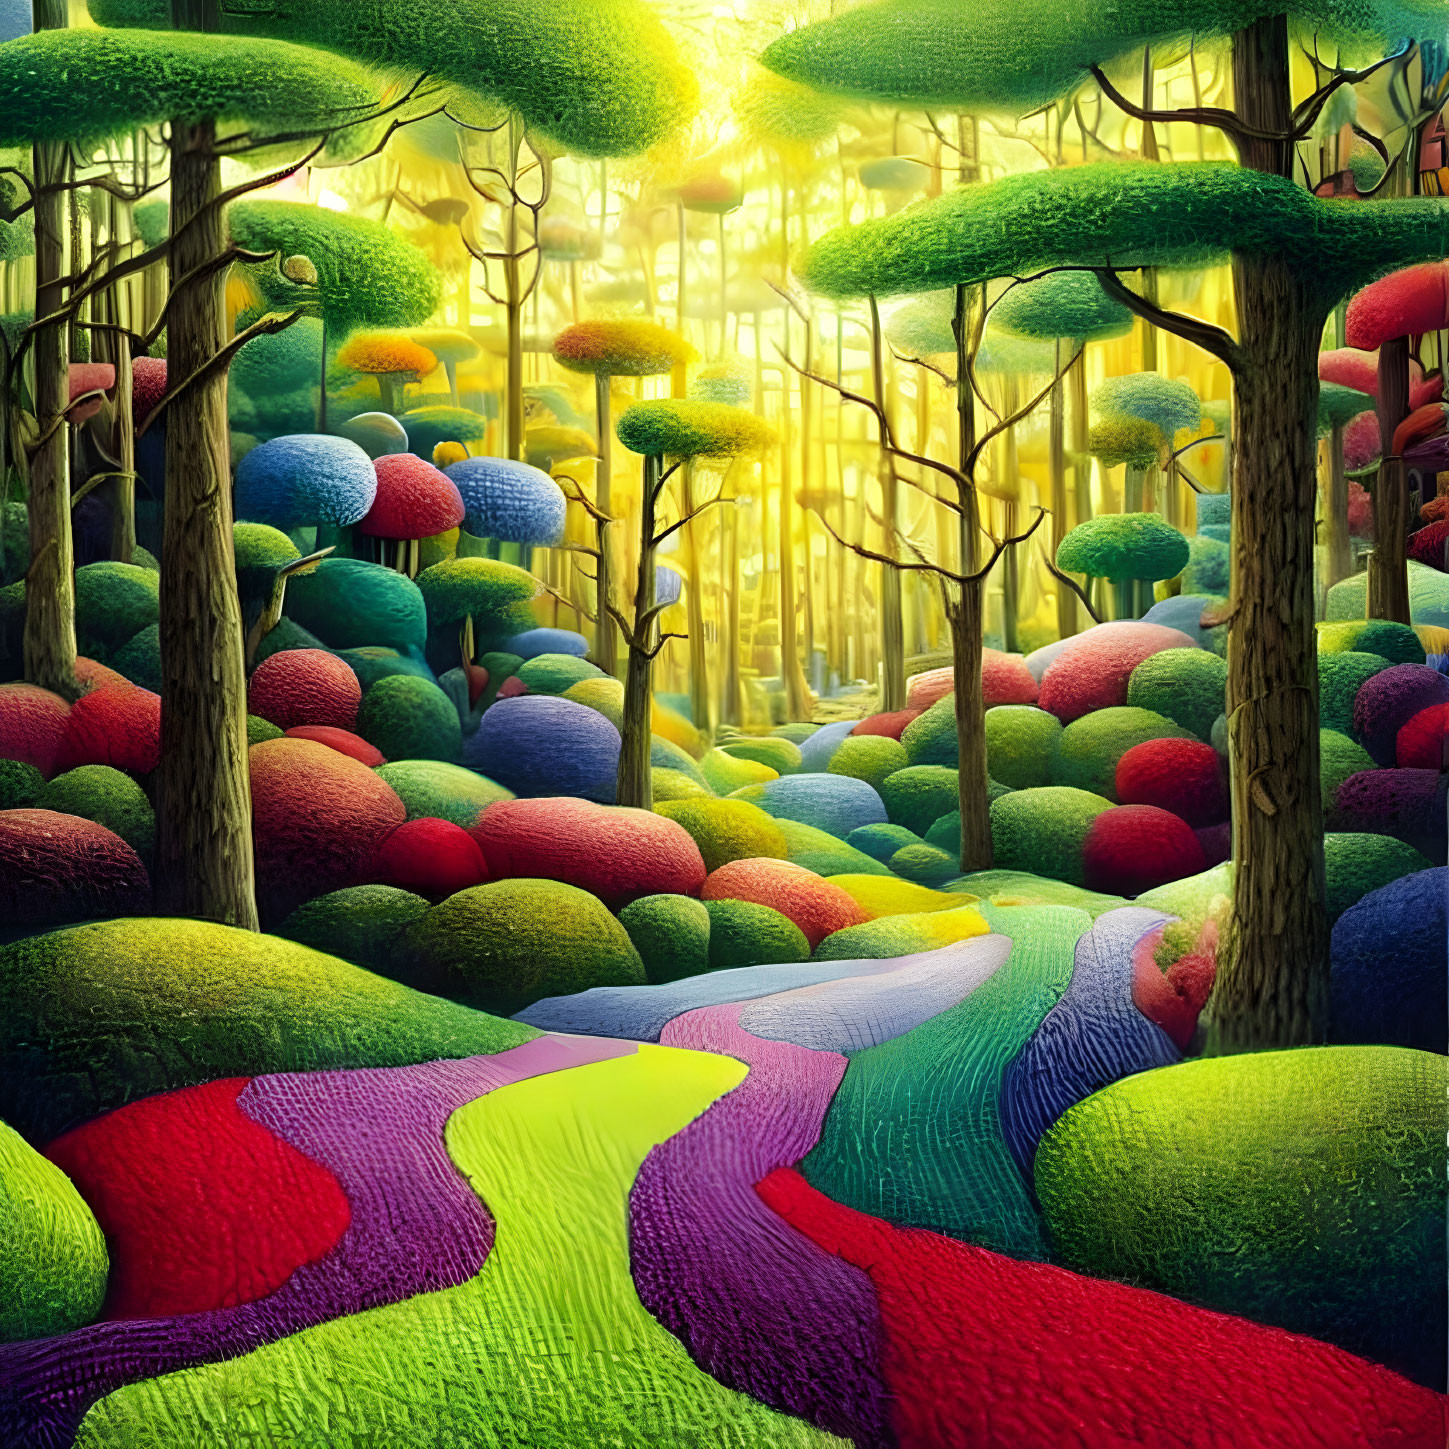 Multicolored, Textured Forest Floor with Illuminated Tree Canopies